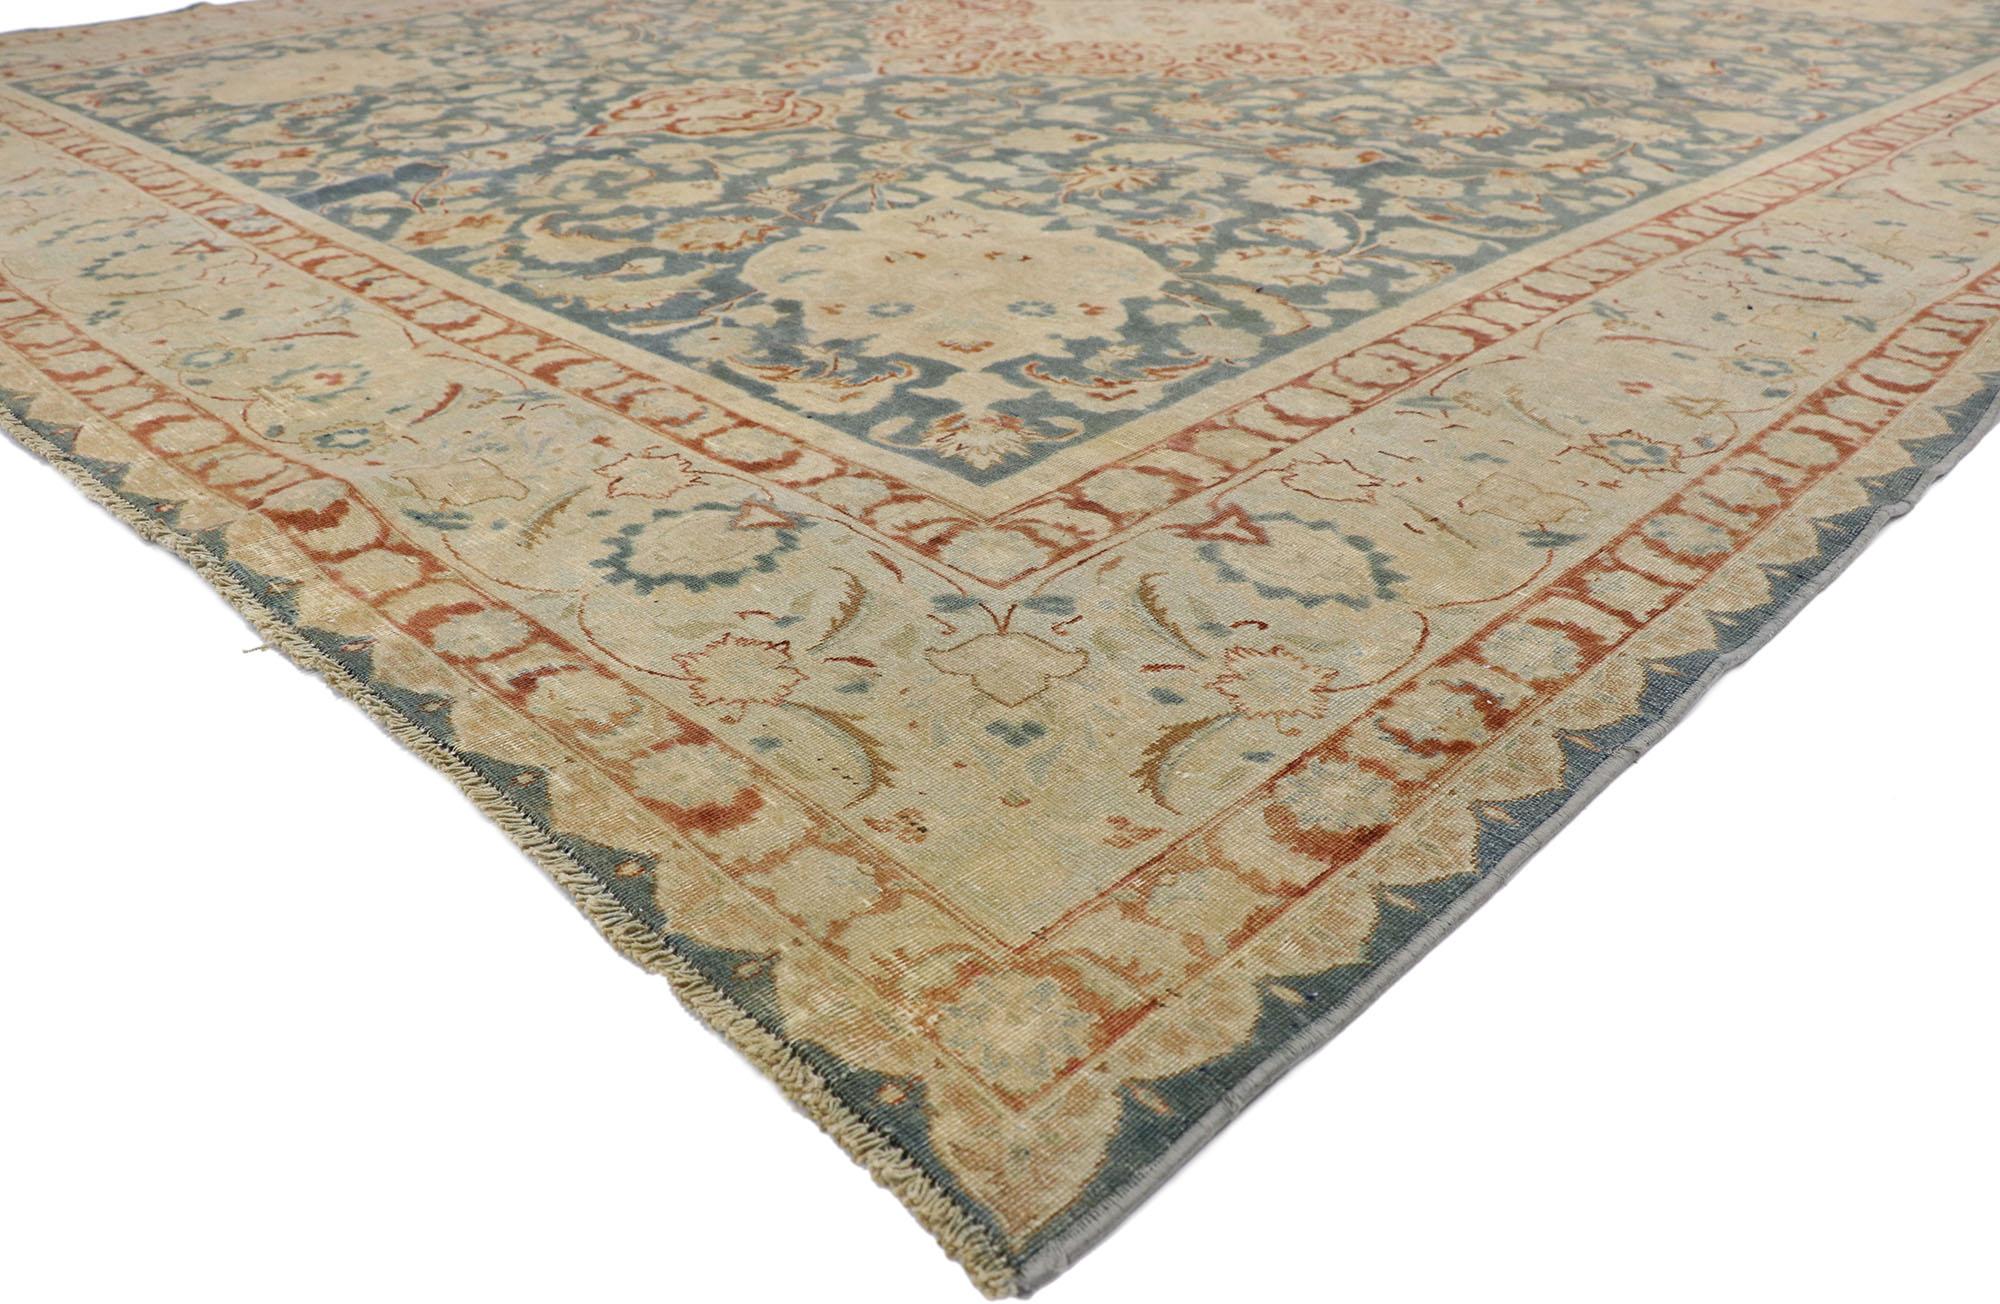 52669 Distressed Antique Persian Heriz Design Rug with English Chintz Rustic Style 09'10 x 12'02. Balancing a timeless design with a romantic rustic sensibility, this hand knotted wool distressed antique Persian Heriz Design rug beautifully embodies